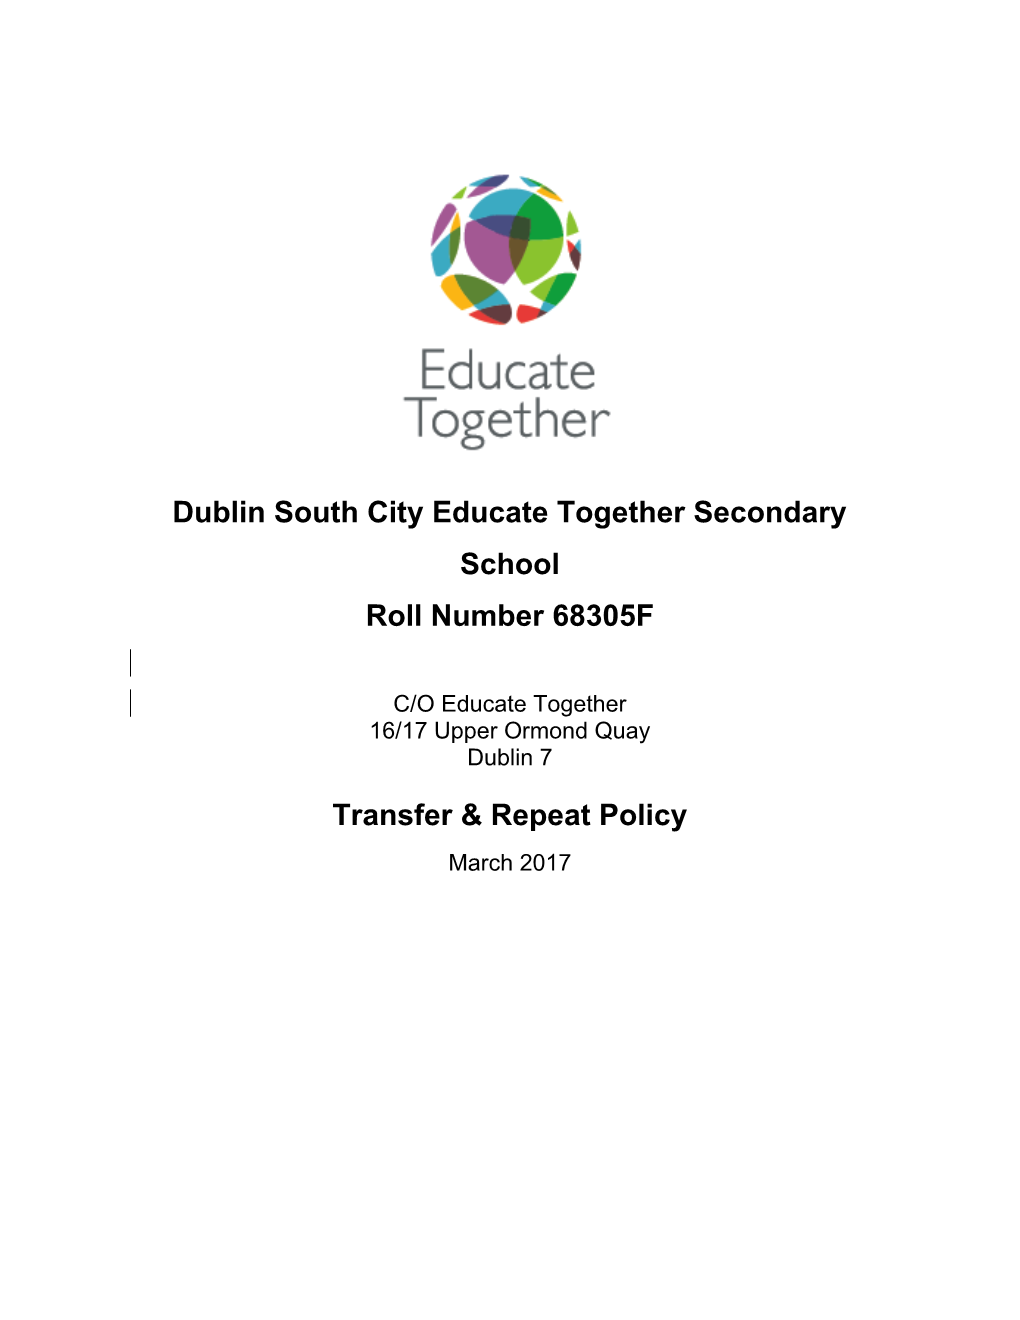 Dublin South City Educate Together Secondary School